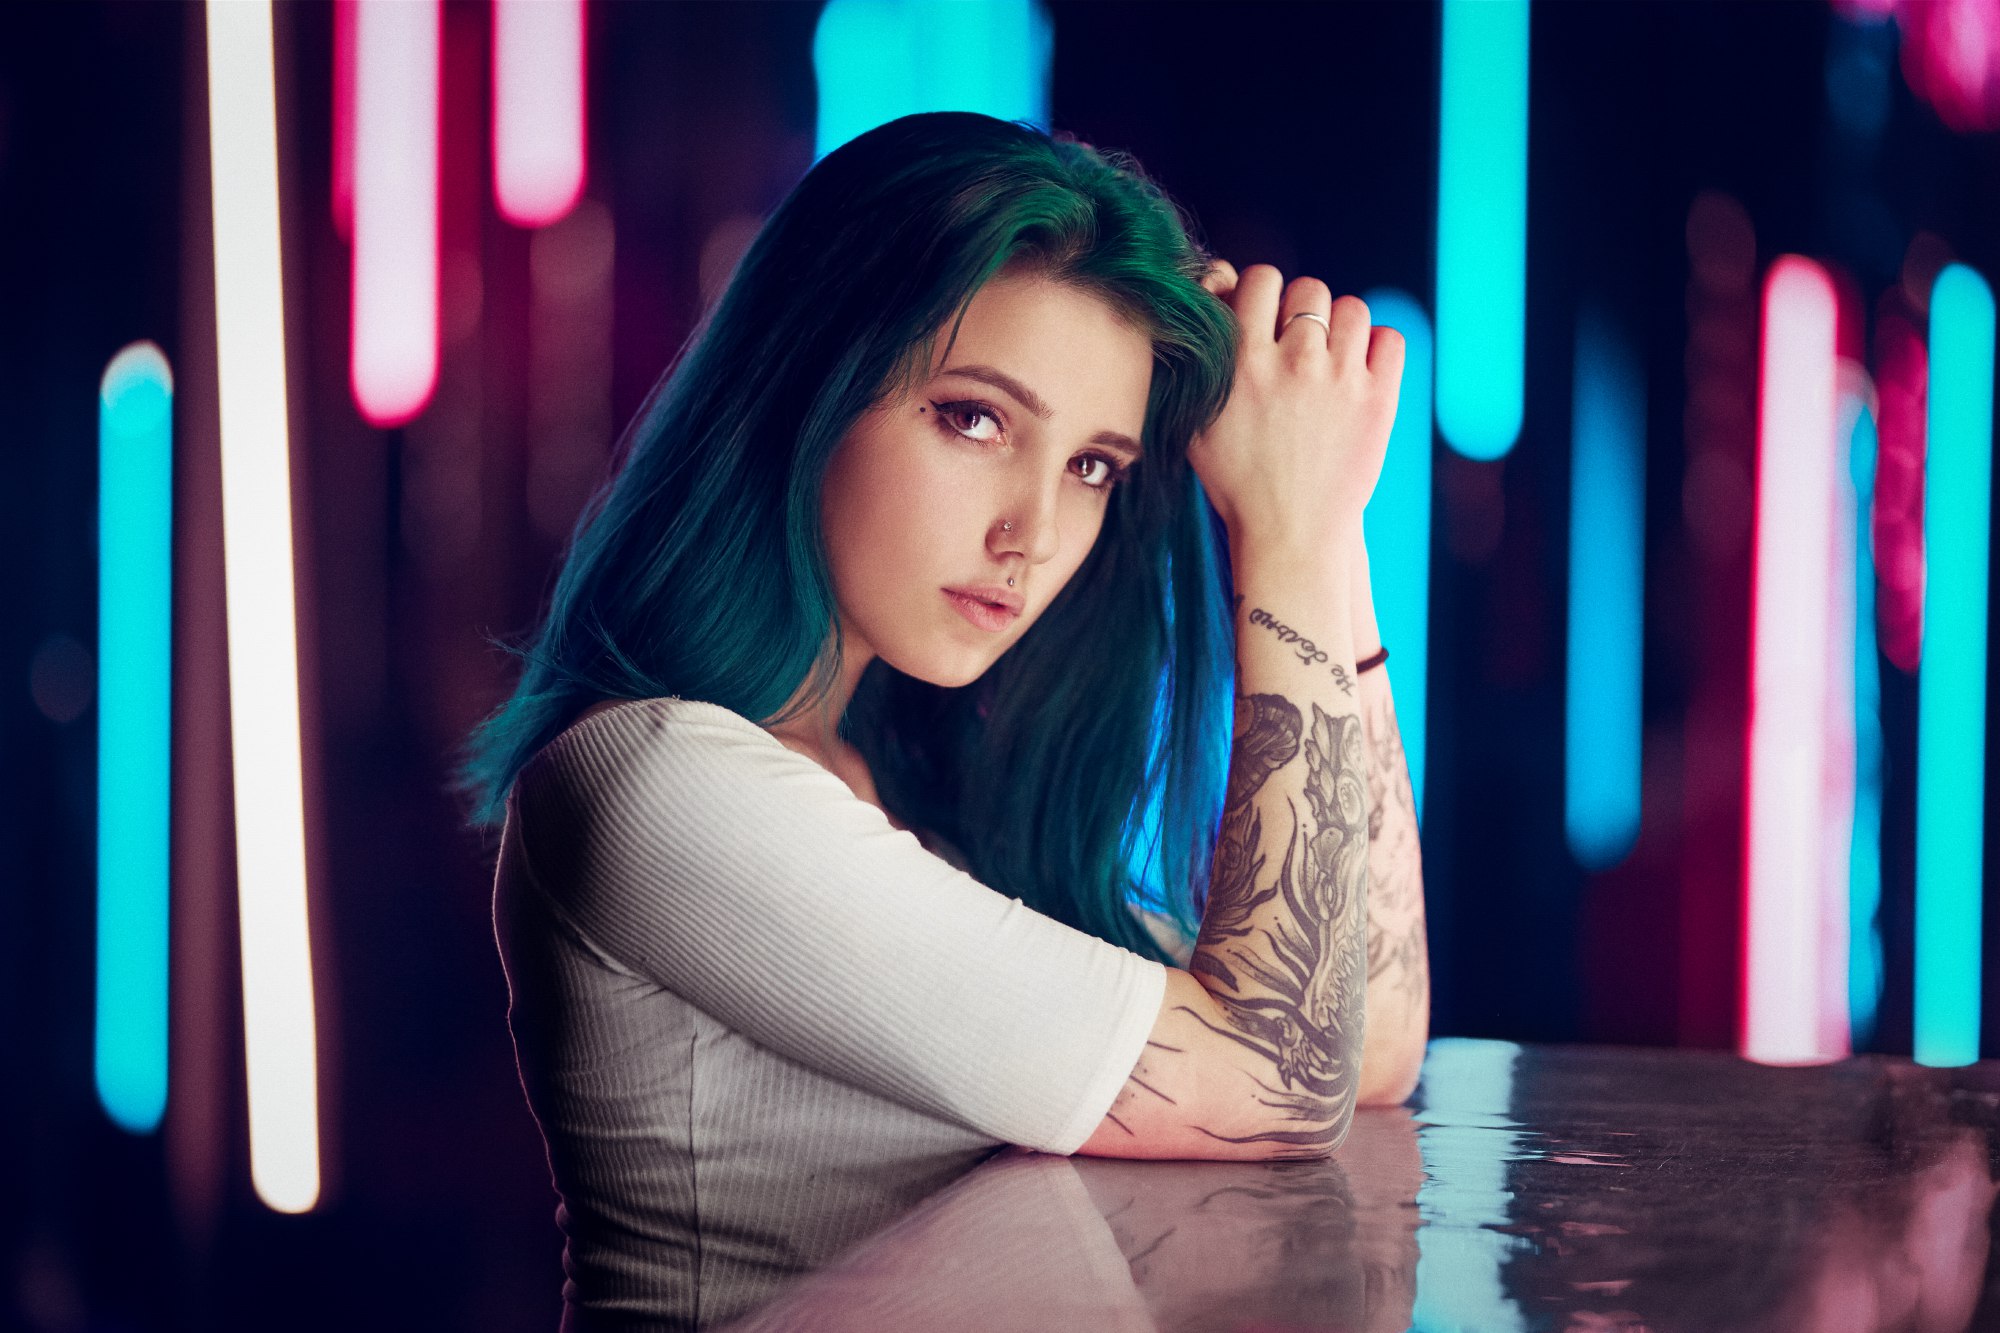 Girl With Dyed Hair And Tattoos - HD Wallpaper 